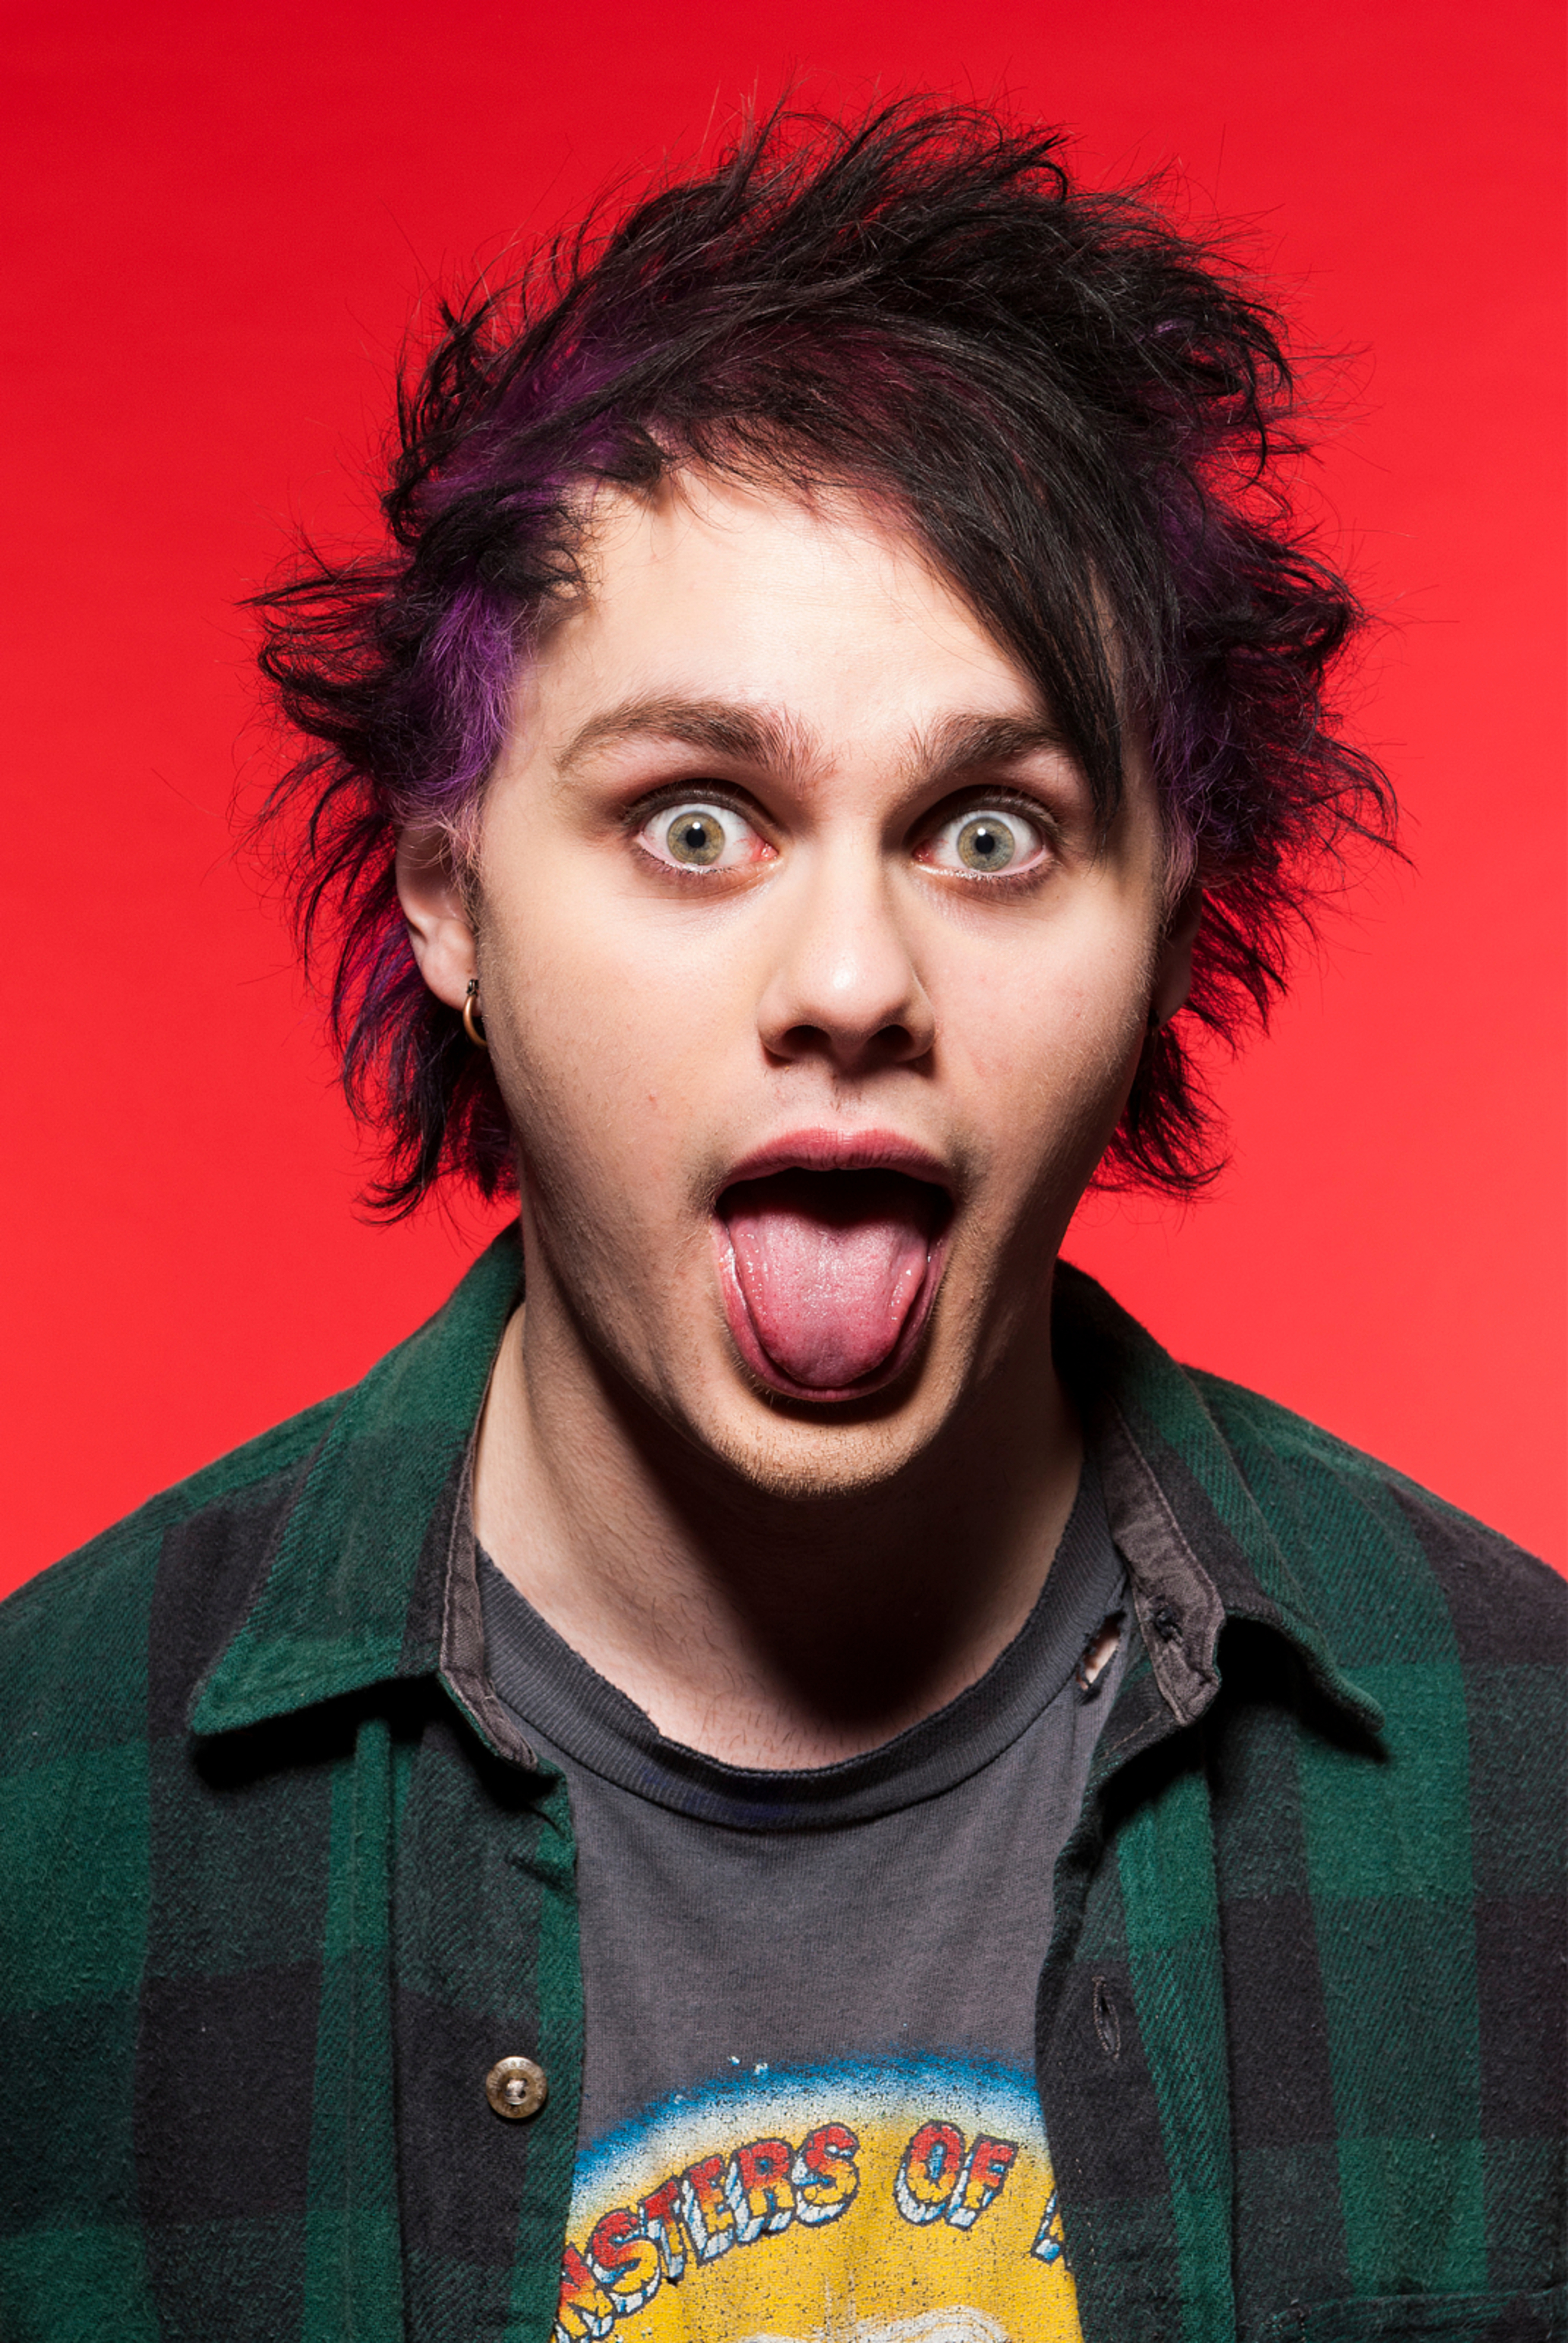 Teen Now - Michael Clifford Red Background - HD Wallpaper 